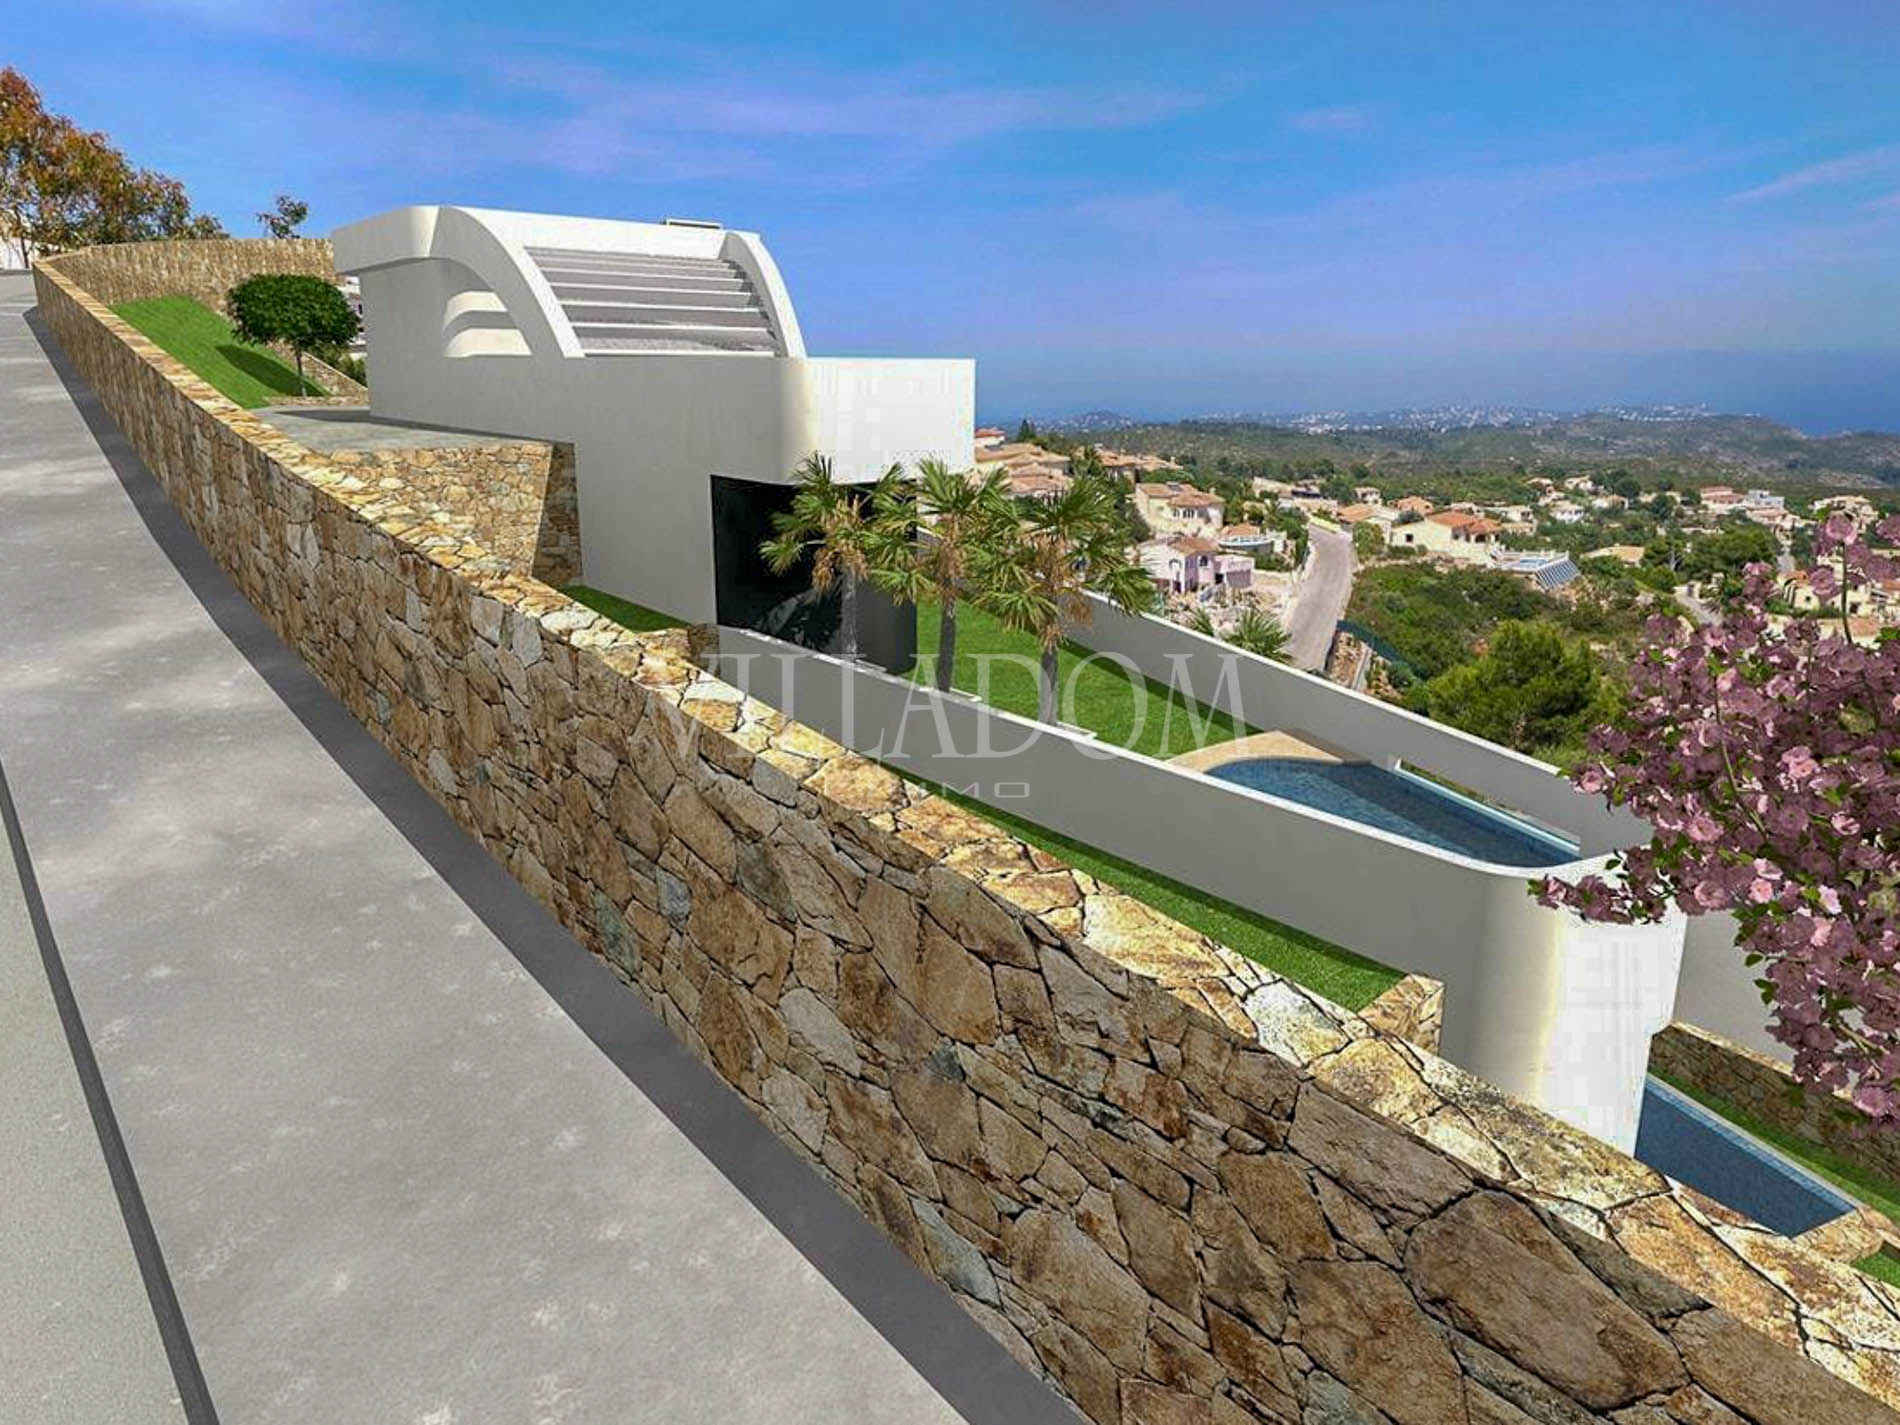 LUXURY villa in project with SEA VIEWS in Javea